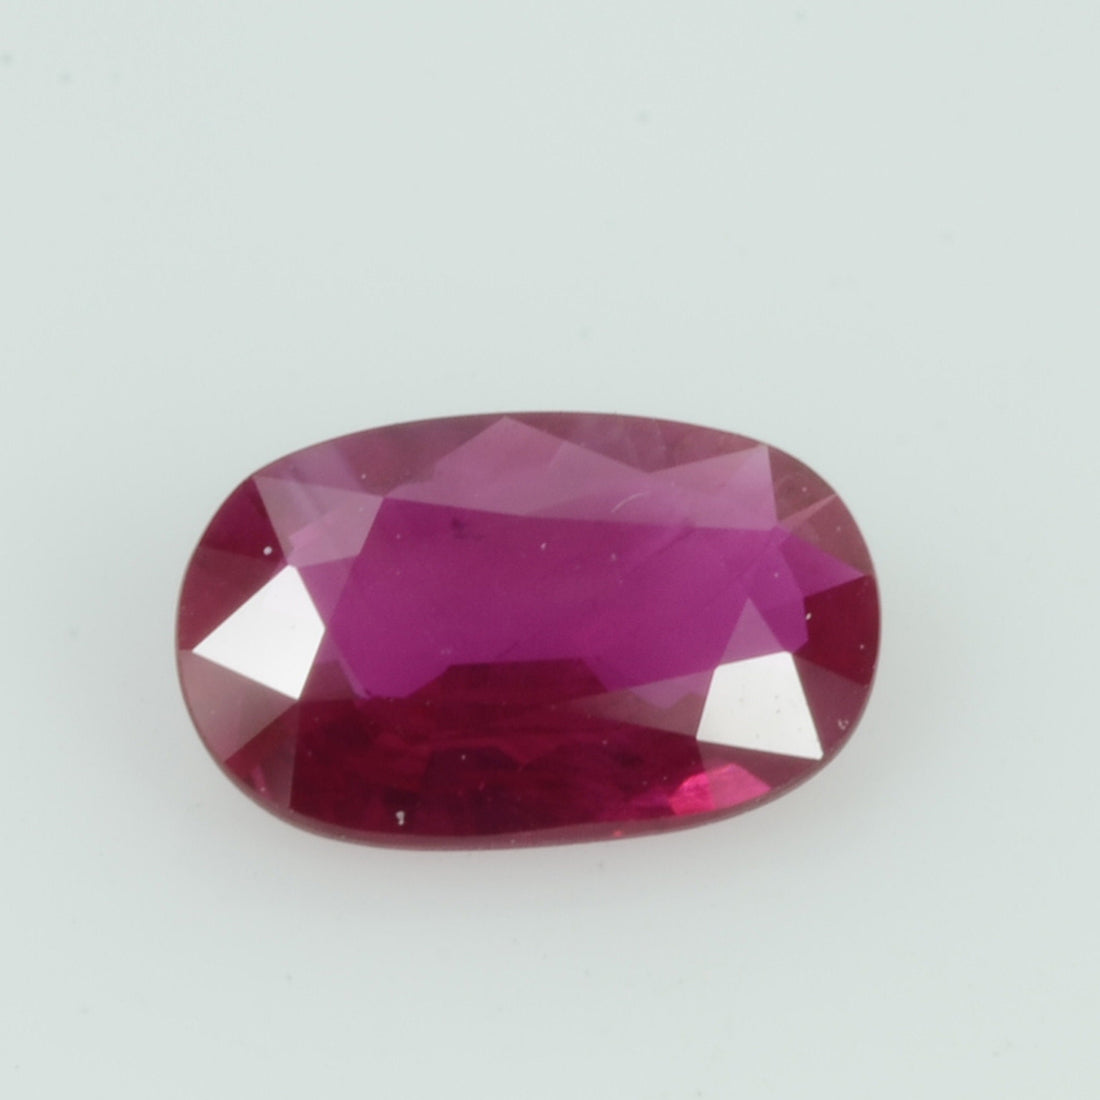 0.76 Cts Natural Vietnam Ruby Loose Gemstone Oval Cut